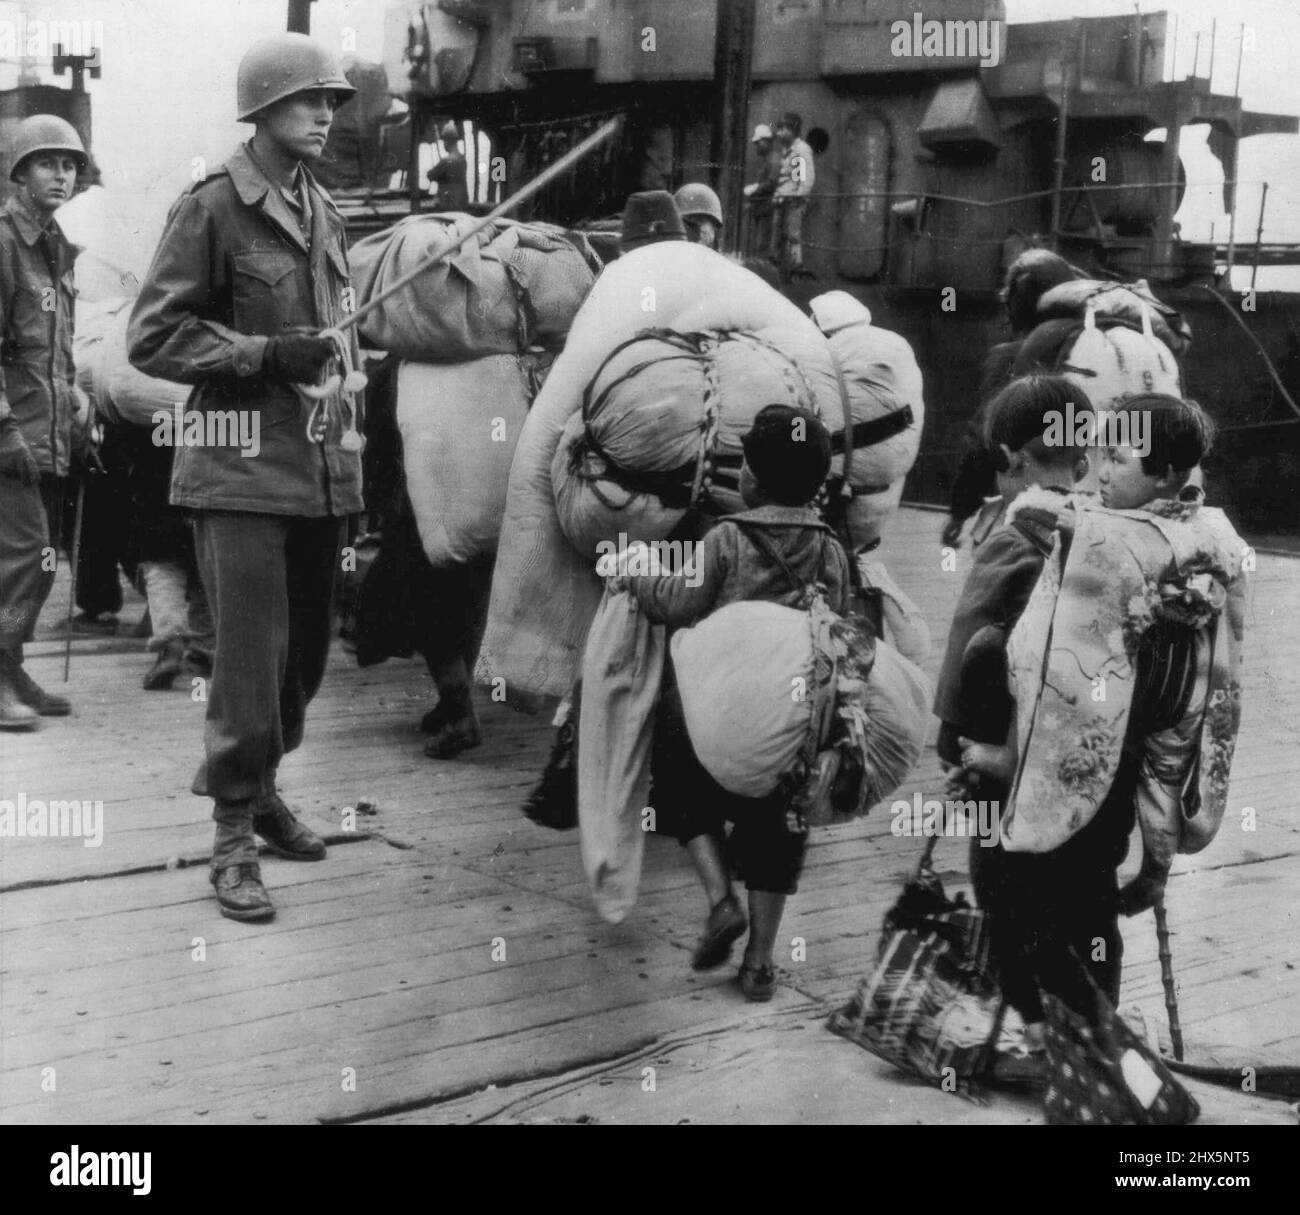 Japs Go Home with Heavy Burdens - A Japanese child Laden with Bundles and carrying her Tiny Brother on her back trods across a pier in Fusan, Korean Port, with other Burdened Japanese being repatriated to their homeland. December 11, 1945. Stock Photo